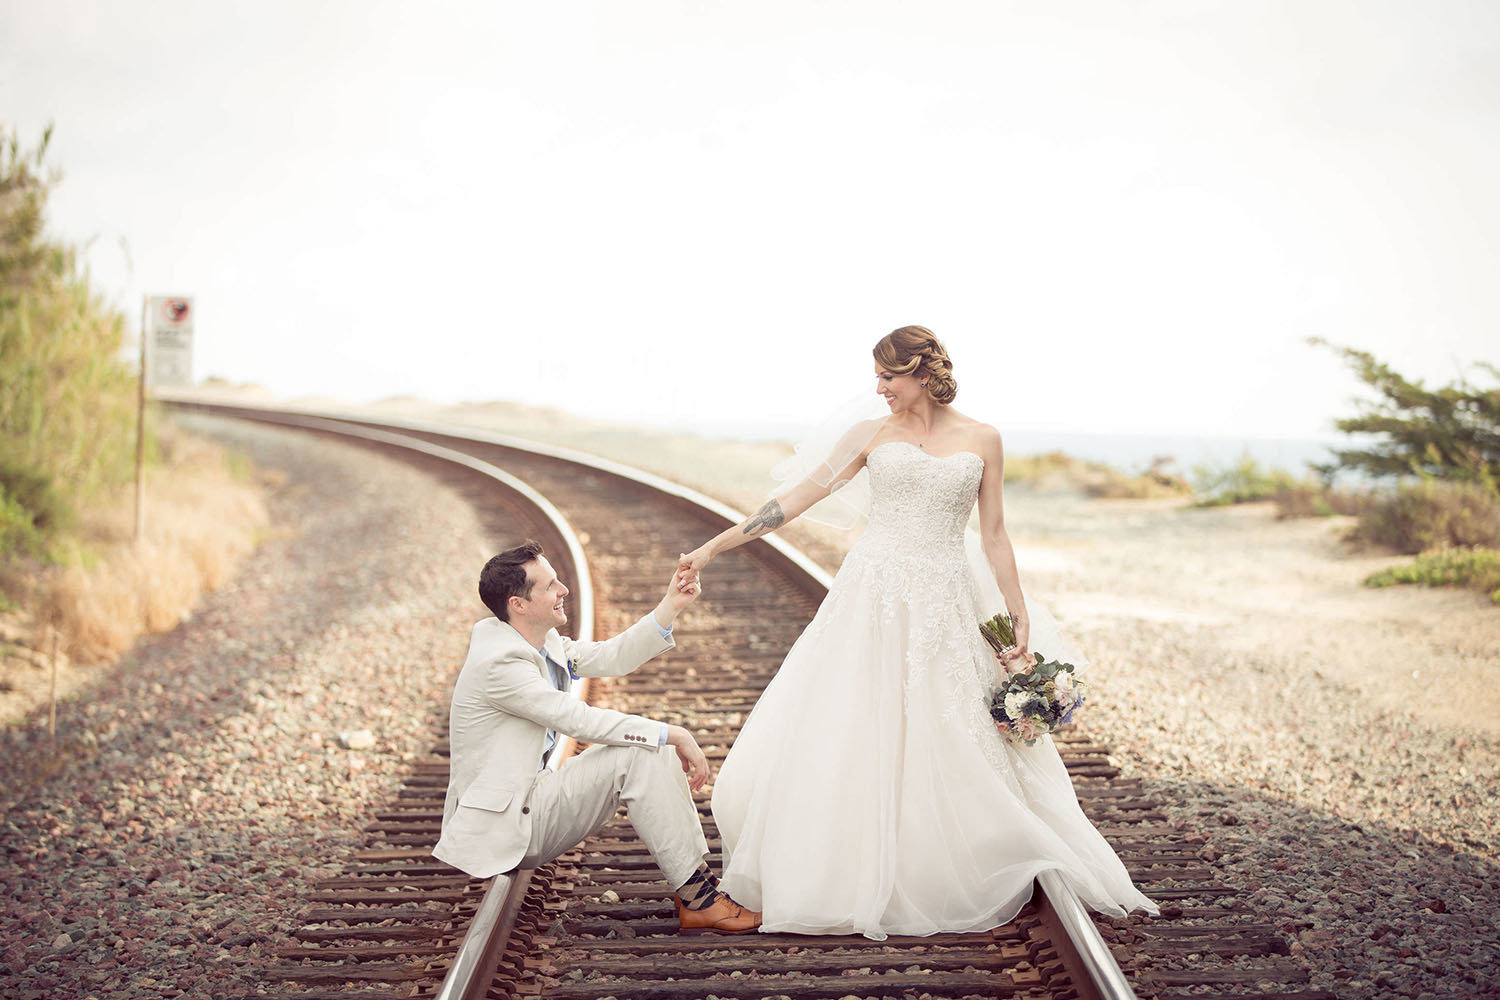 Cute pose for bride and groom